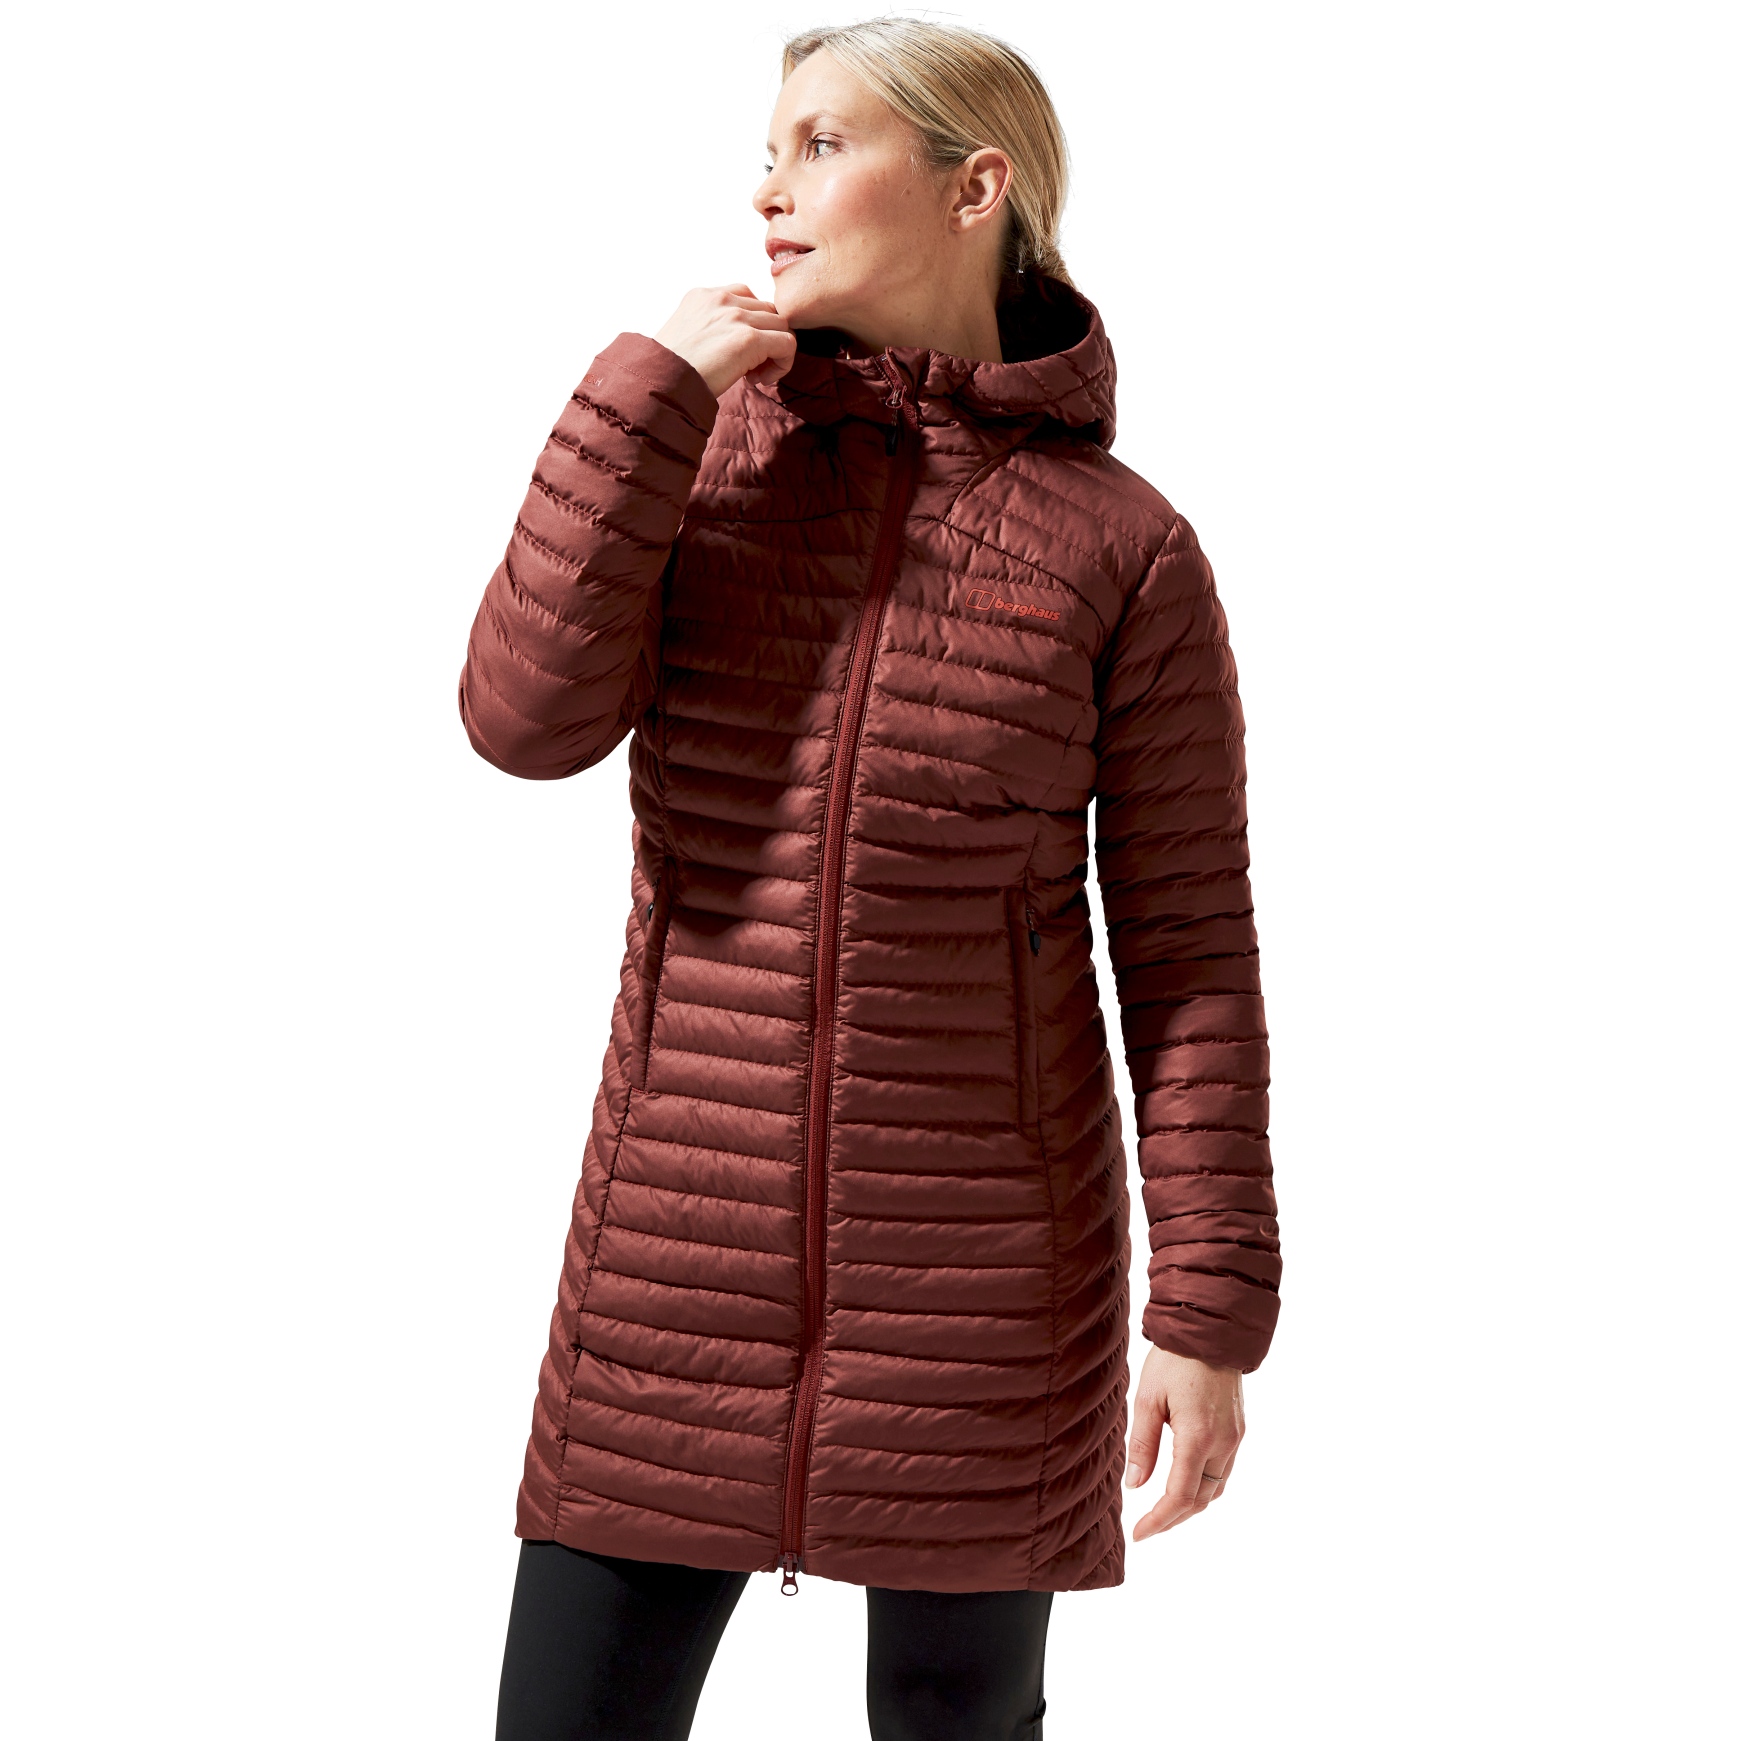 Picture of Berghaus Nula Micro Synthetic Insulated Long Jacket Women - Burgundy Fawn